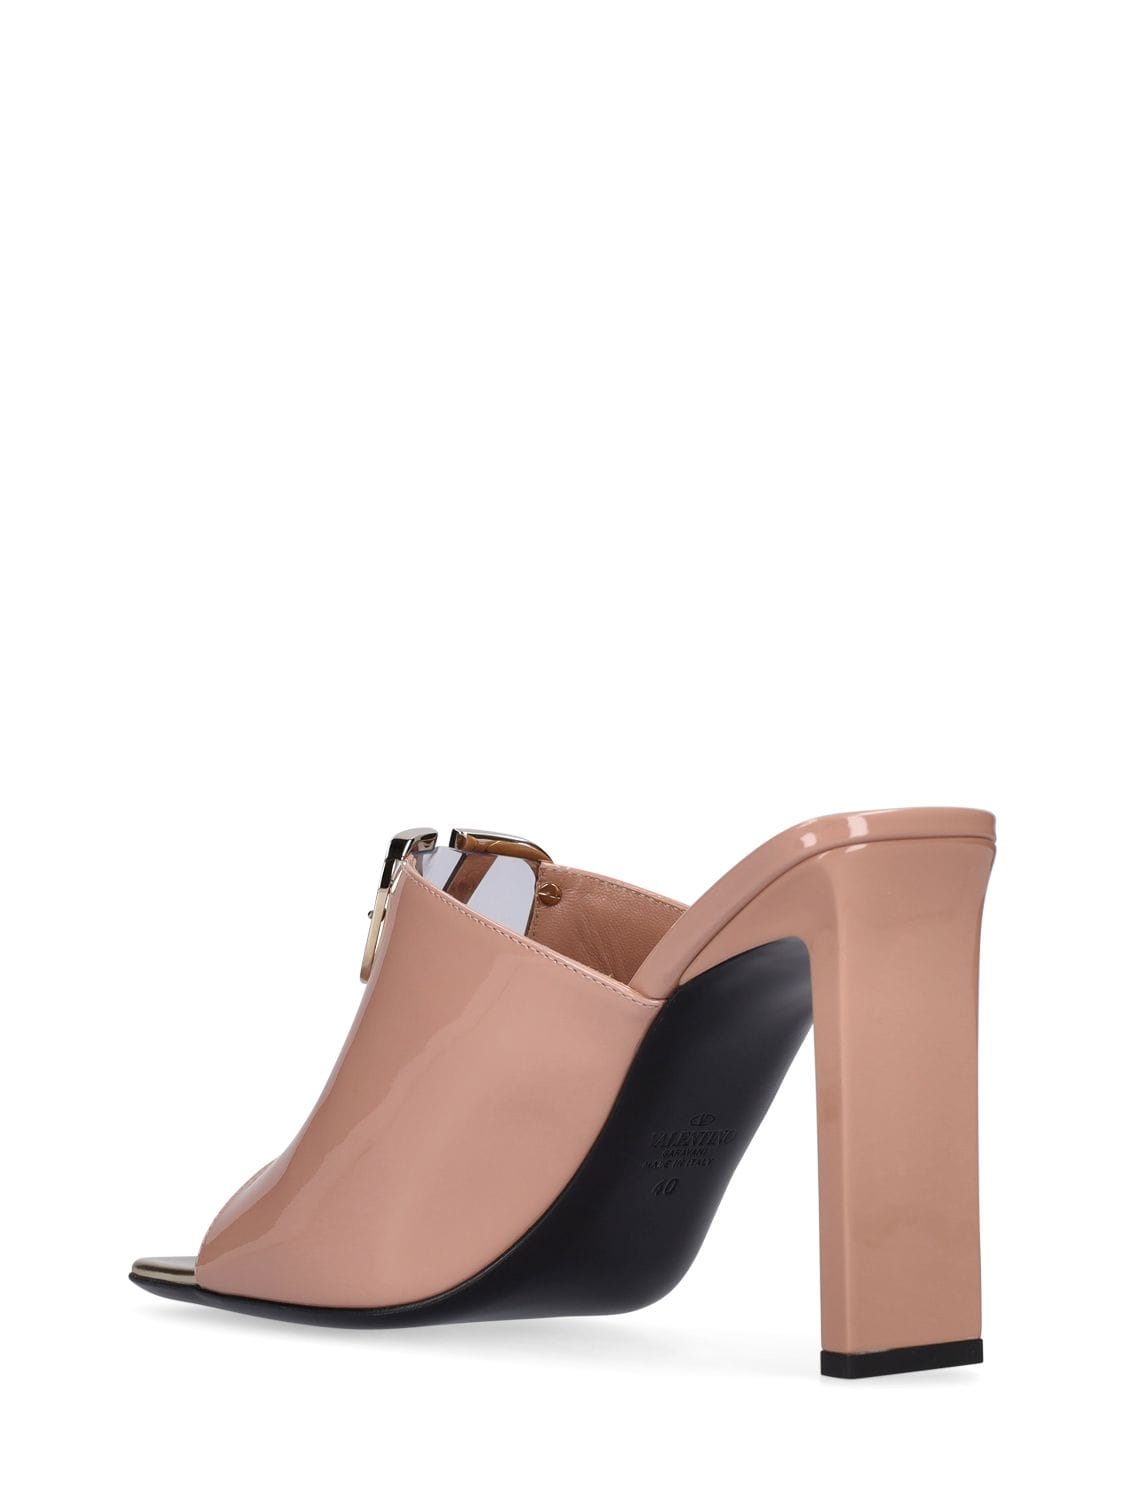 Shop Valentino 100mm Vlogo Patent Leather Sandals In Blush